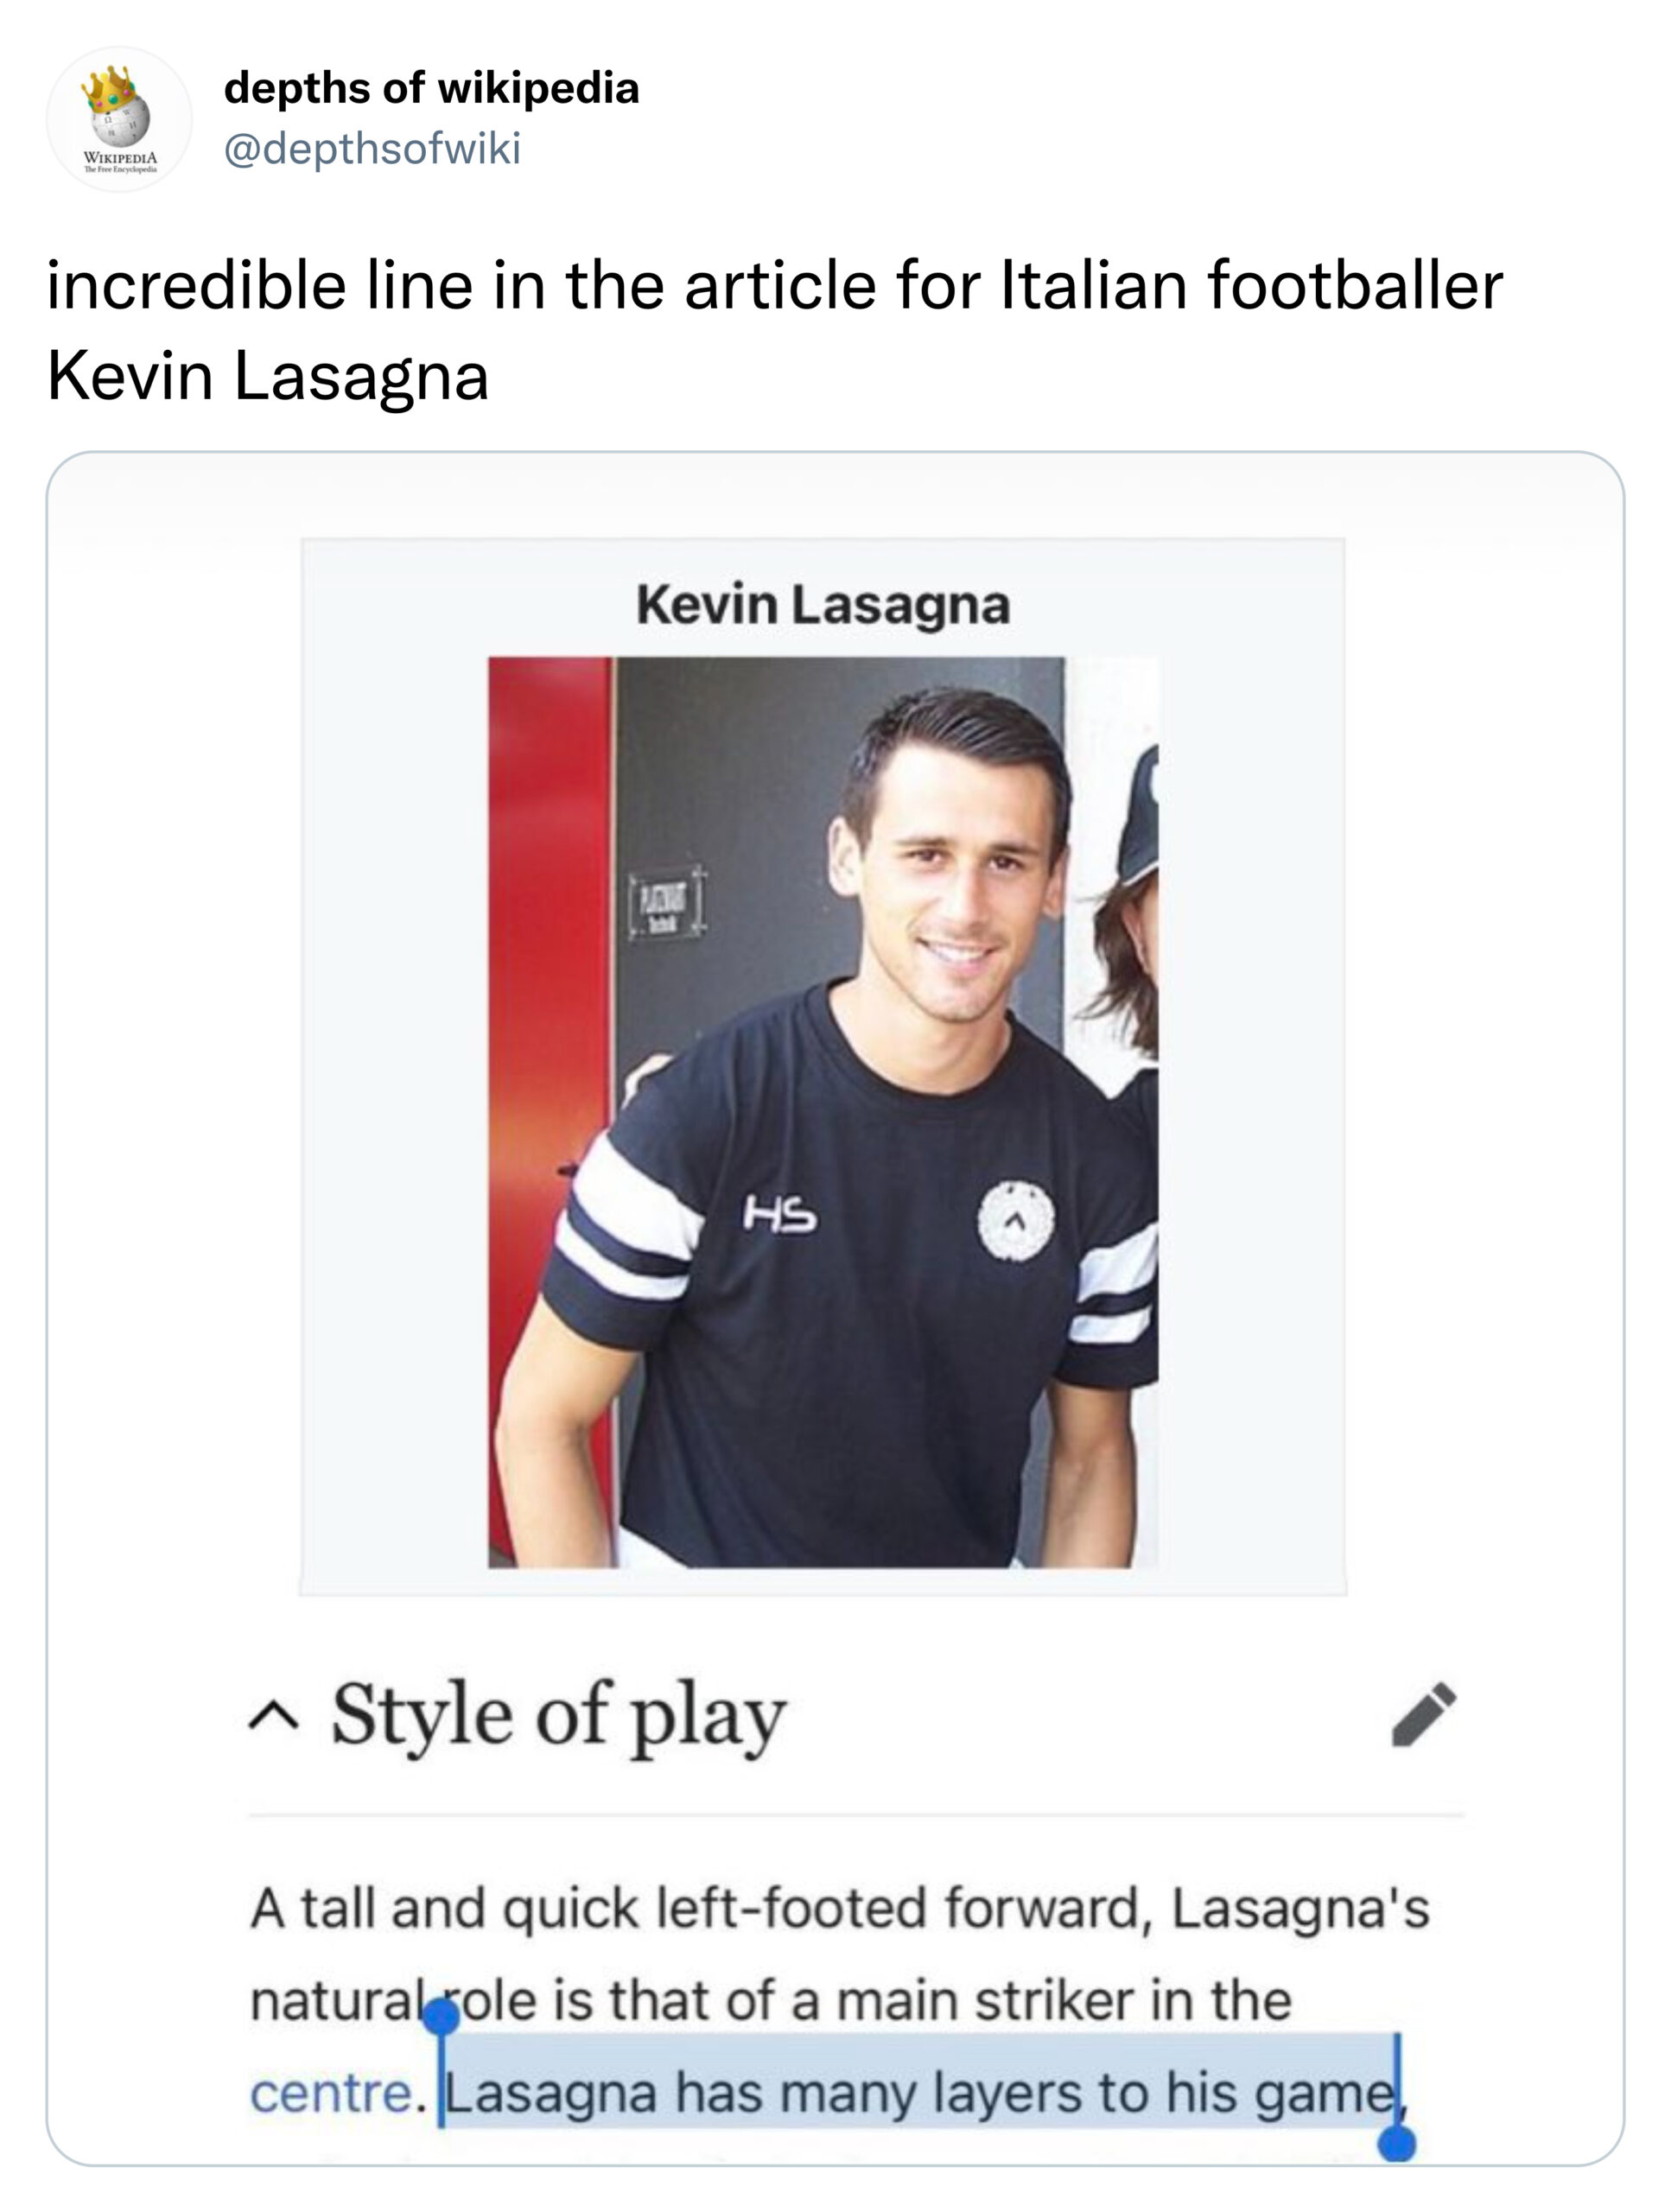 funny tweets and posts on twitter -  shoulder - Wikipedia The Free Encyclopedia depths of wikipedia incredible line in the article for Italian footballer Kevin Lasagna Kevin Lasagna bat Hs ^ Style of play A A tall and quick leftfooted forward, Lasagna's n